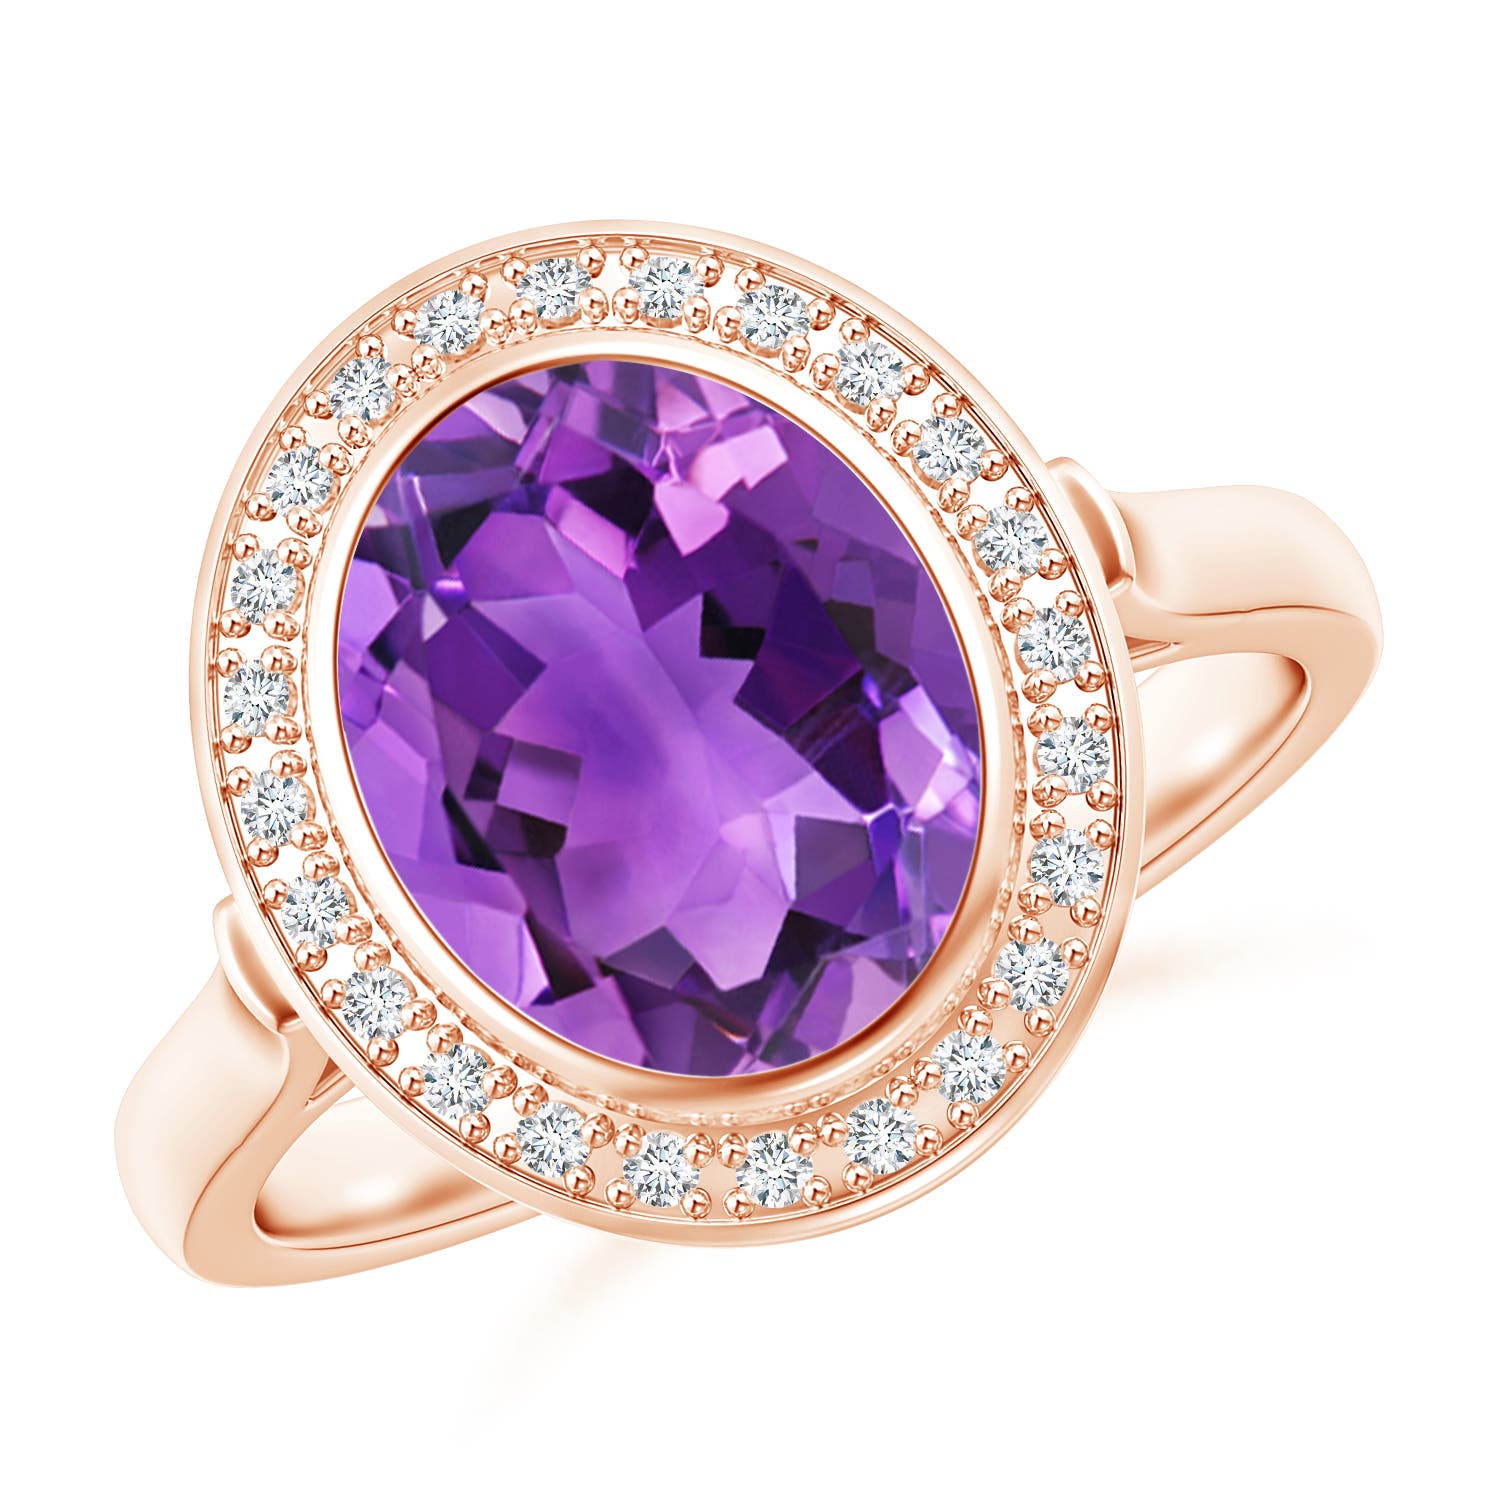 AAA - Amethyst / 2.44 CT / 14 KT Rose Gold